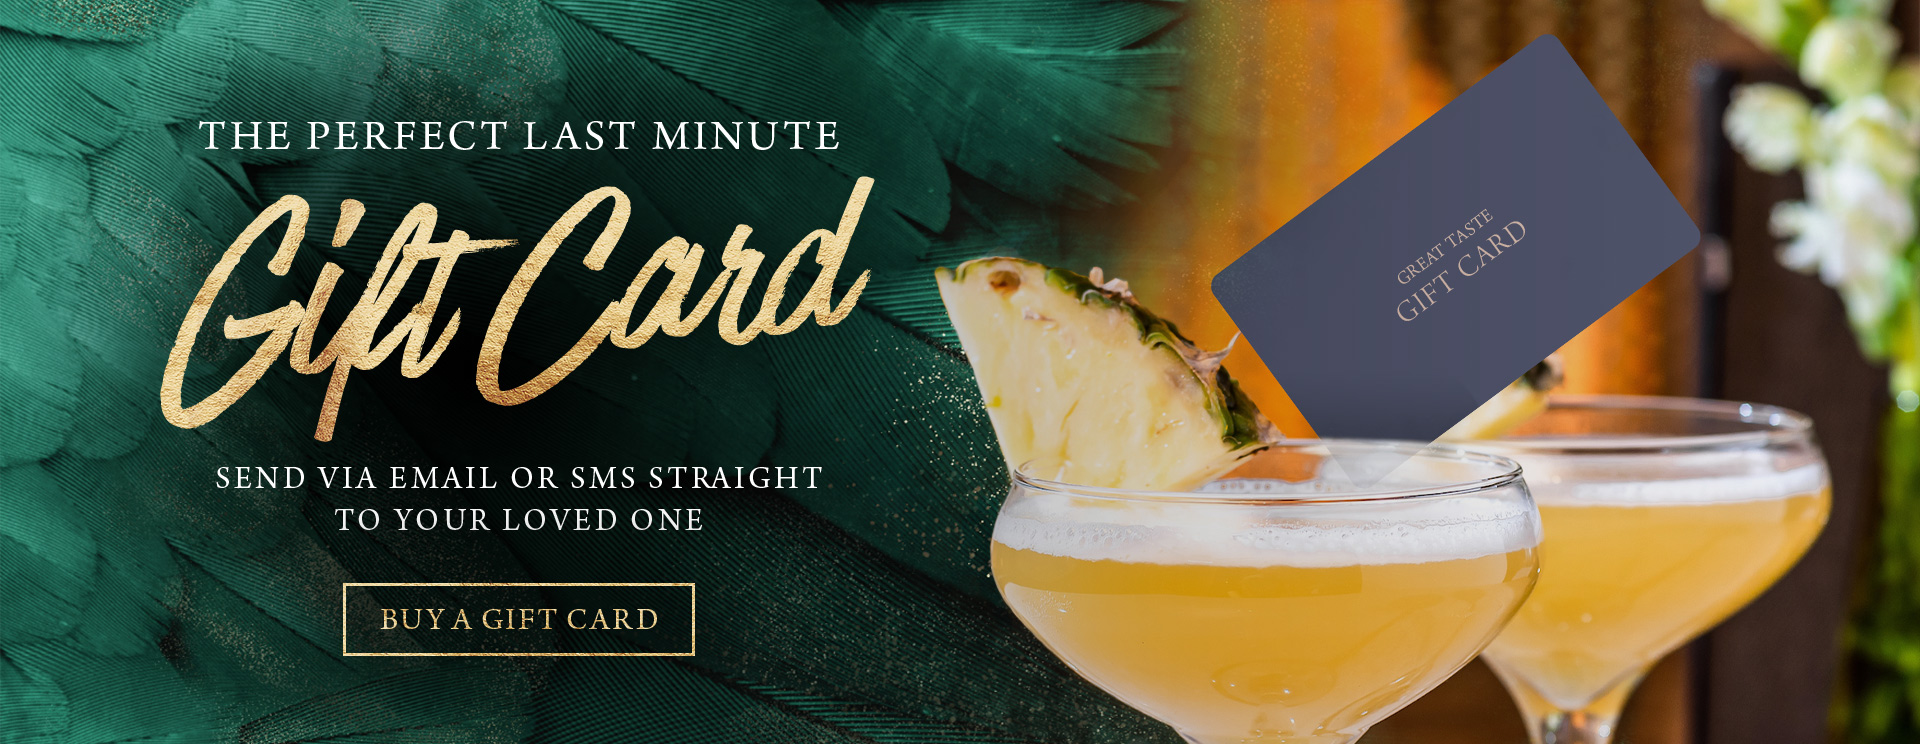 Give the gift of a gift card at The George & Dragon